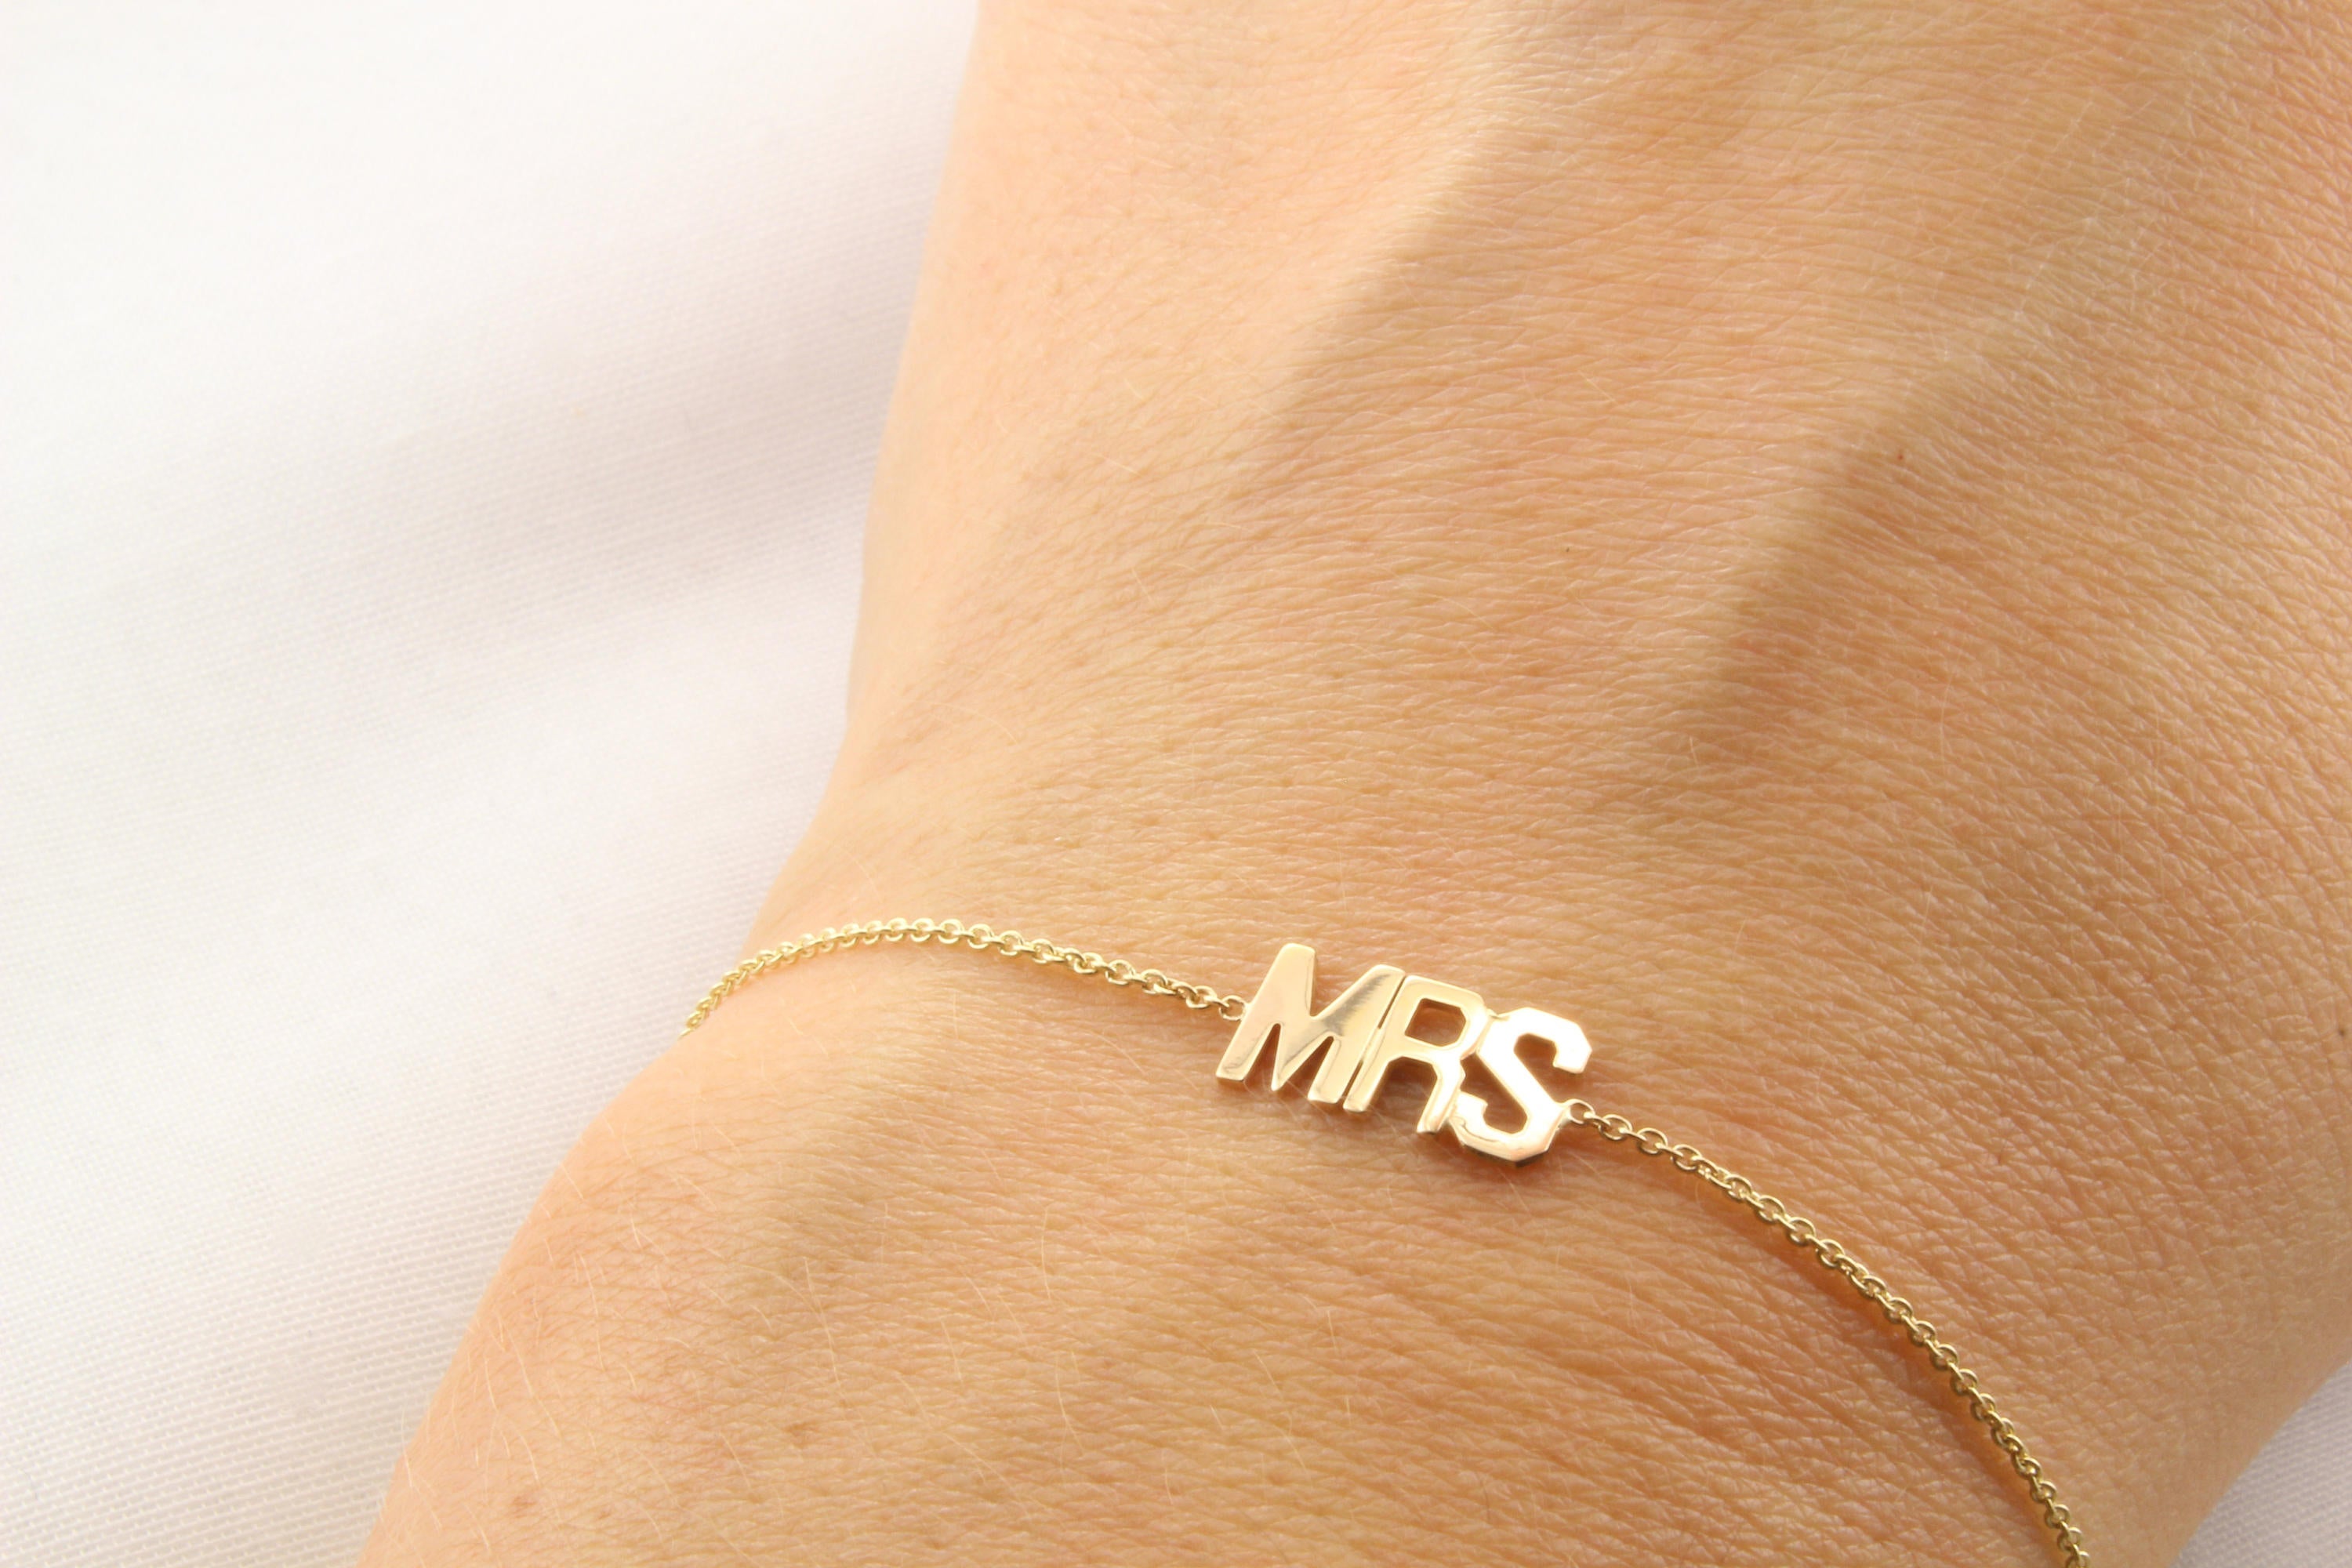 Personalized Three Initial Letter Charm Bracelet